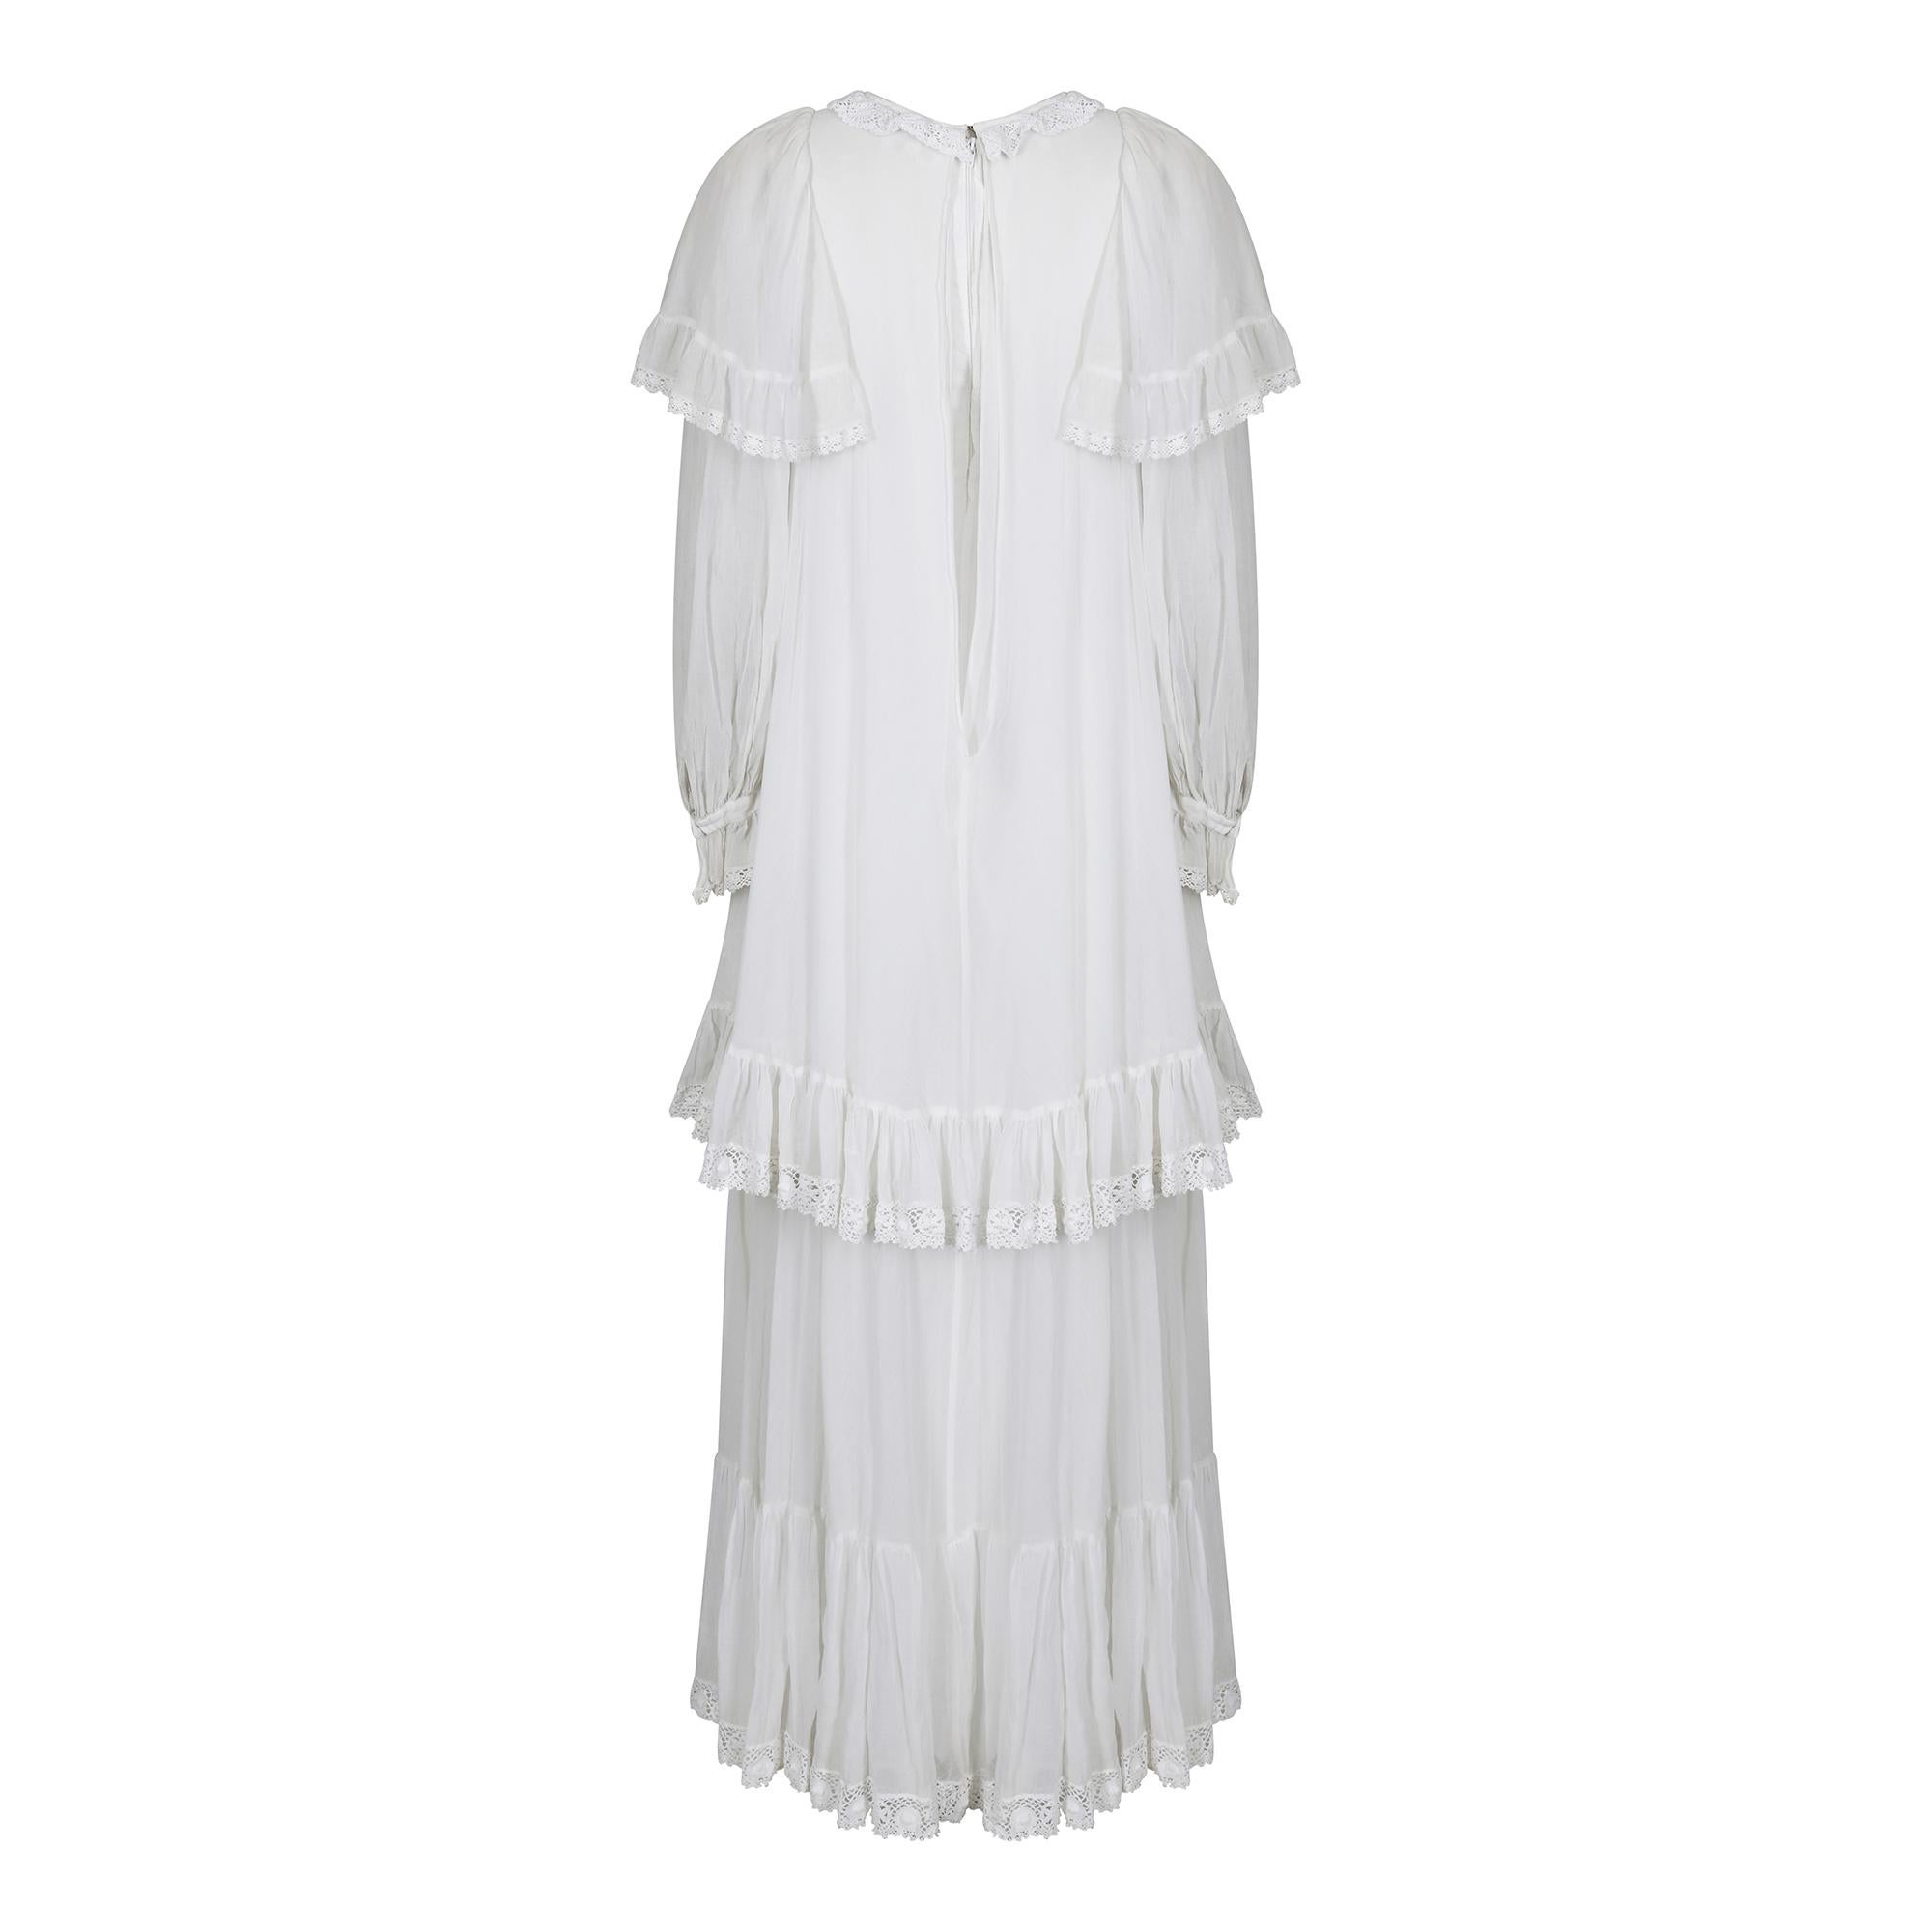 1970s white cotton muslin Gina Fratini dress with blue embroidered waistcoat. This is an ensemble piece with 2 components and the dress is an incredibly flamboyant and romantic affair.  It is a long, double tiered dress with three layers. The first,